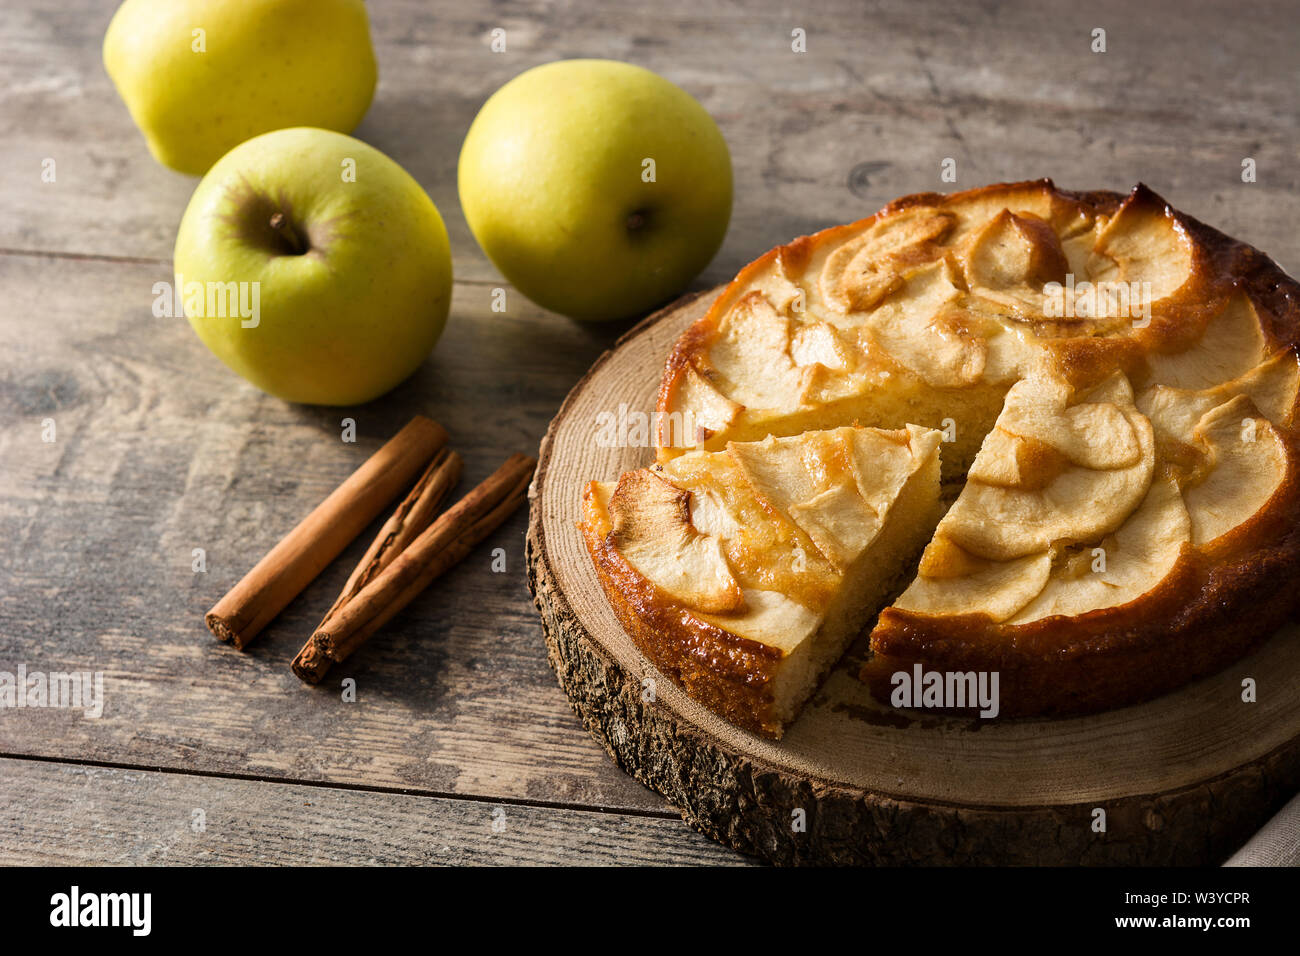 Homemade apple pie on wooden table Stock Photo